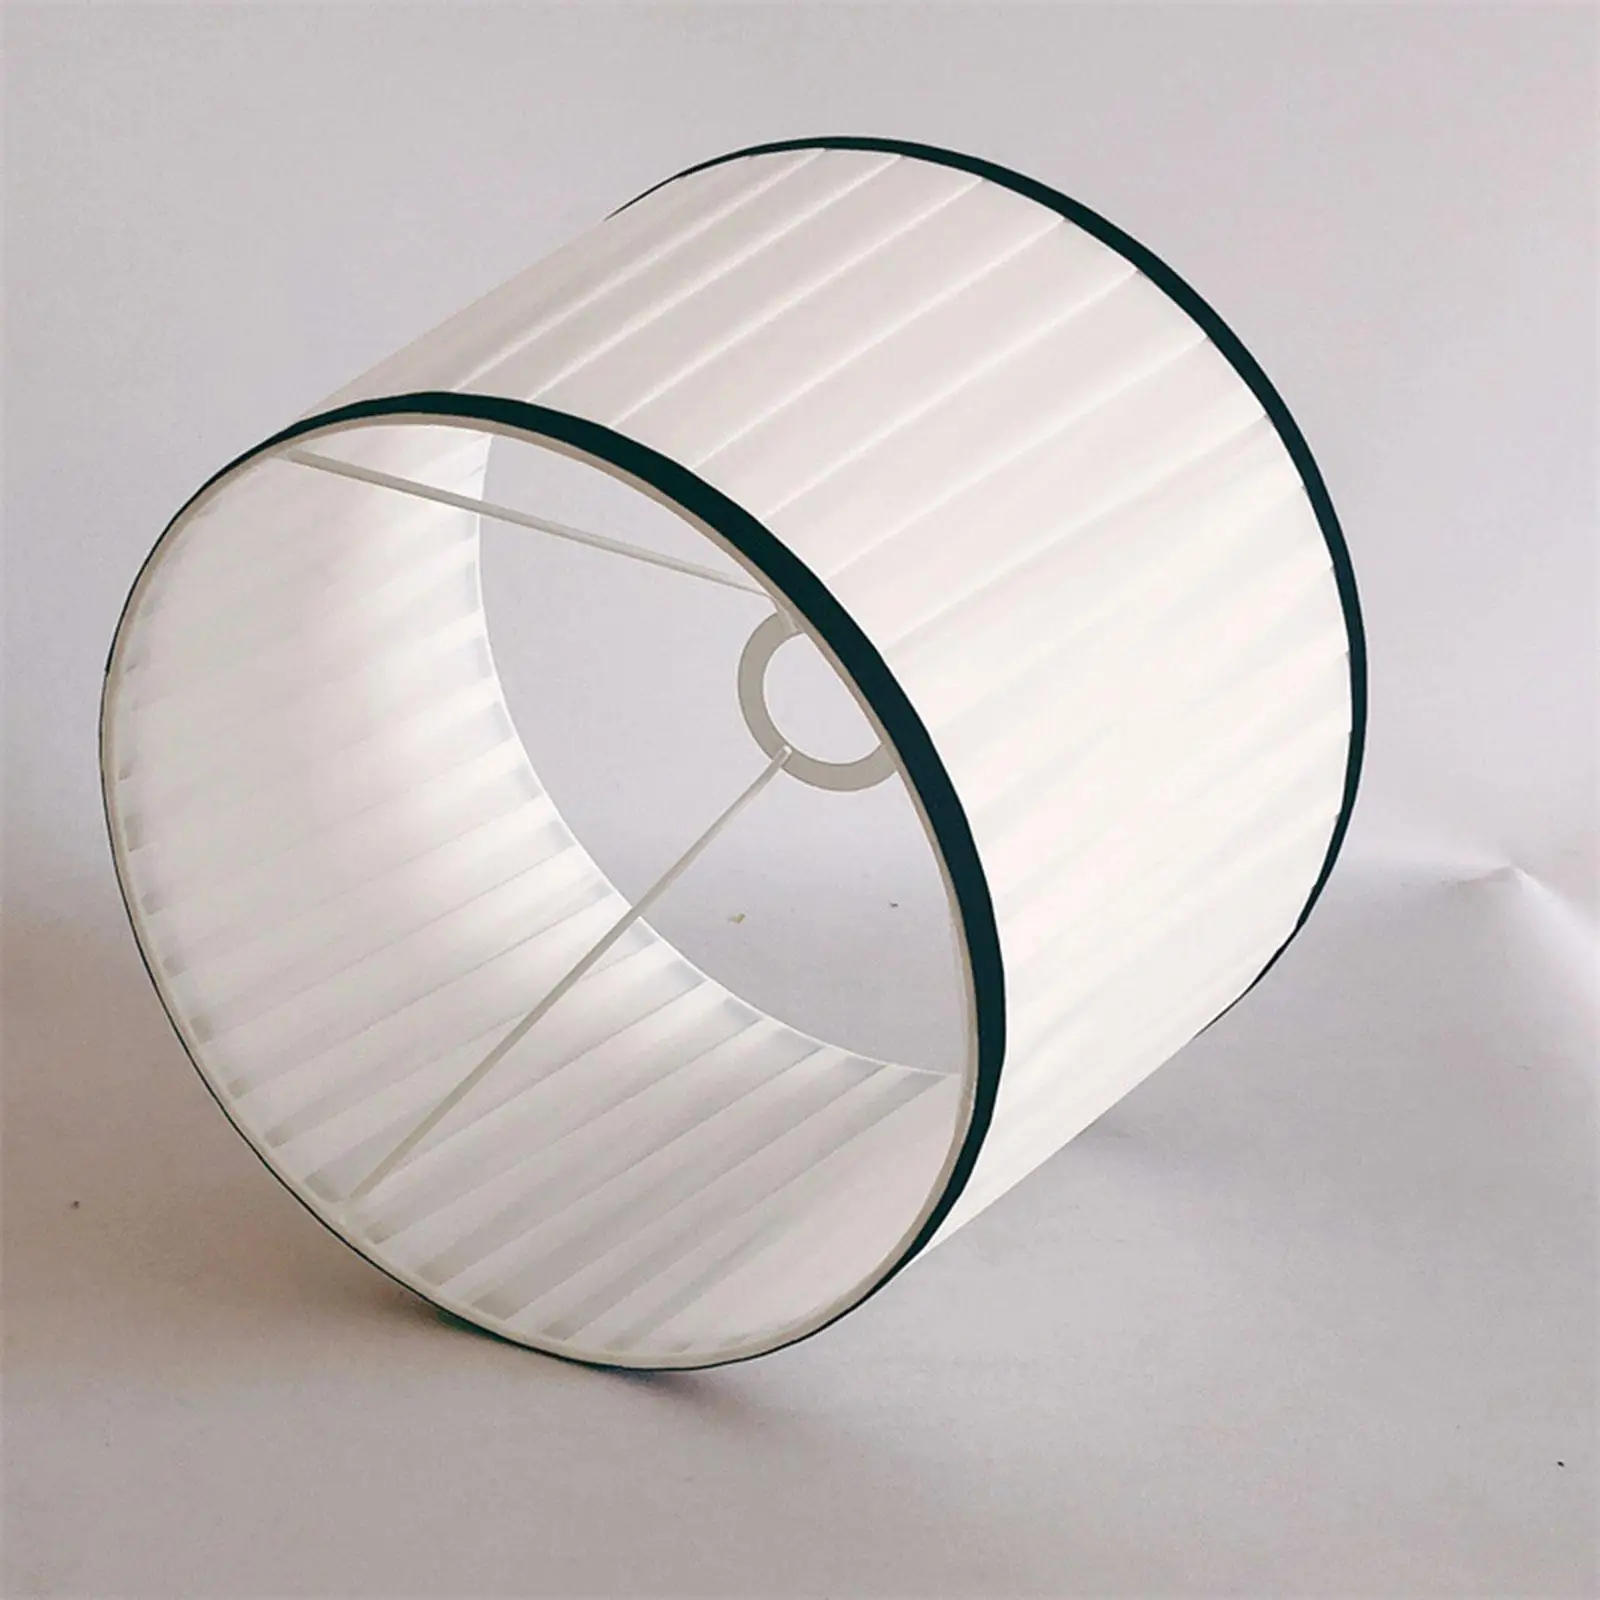 Drum Lamp Shade Table Light Ceiling Light Cover Hotel Lighting Fixtures Cover Simple Bedroom Kitchen Island Lamp Shade